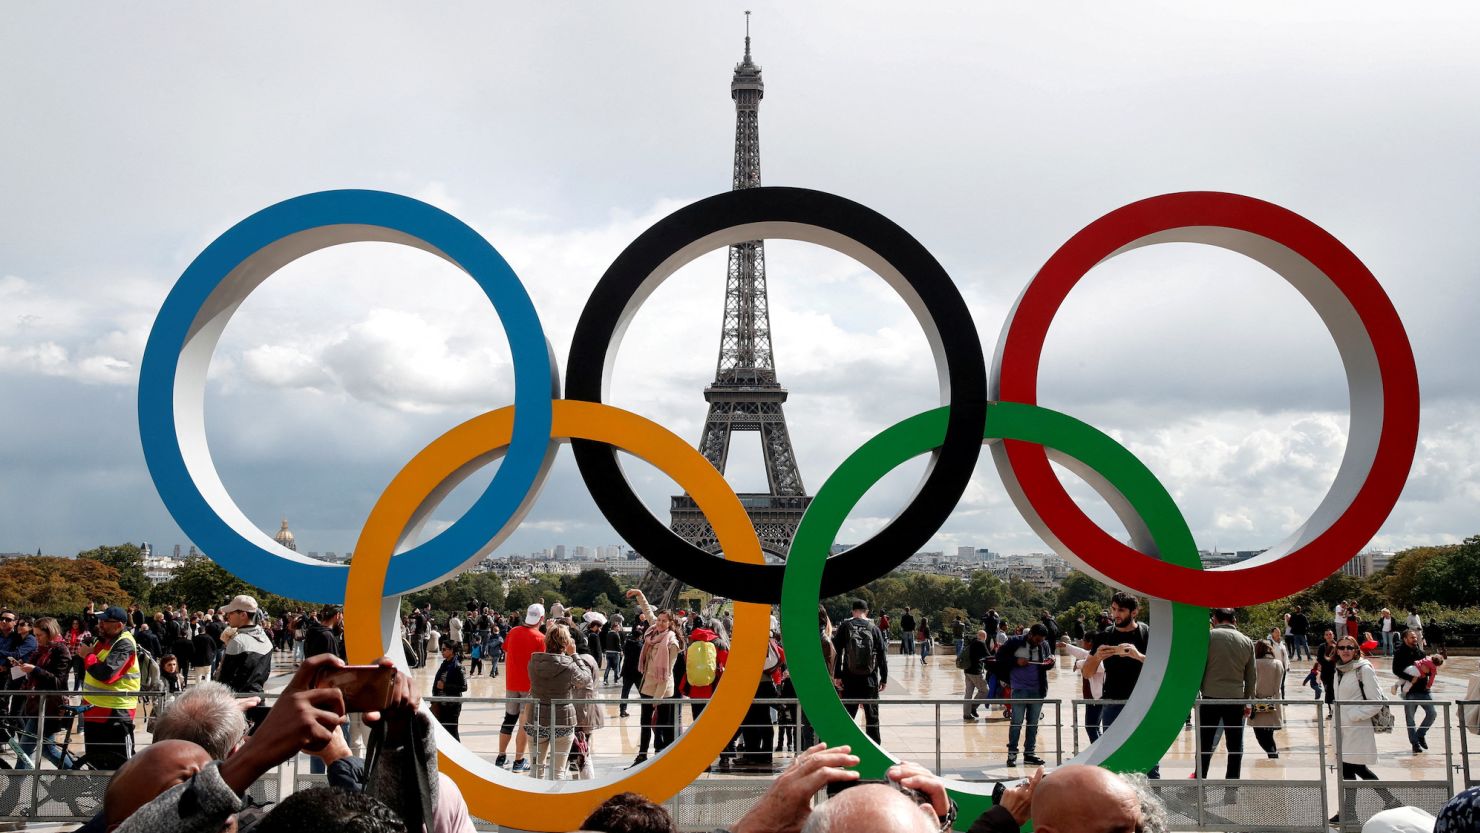 The world’s biggest sporting event is coming to Paris. Not everyone’s